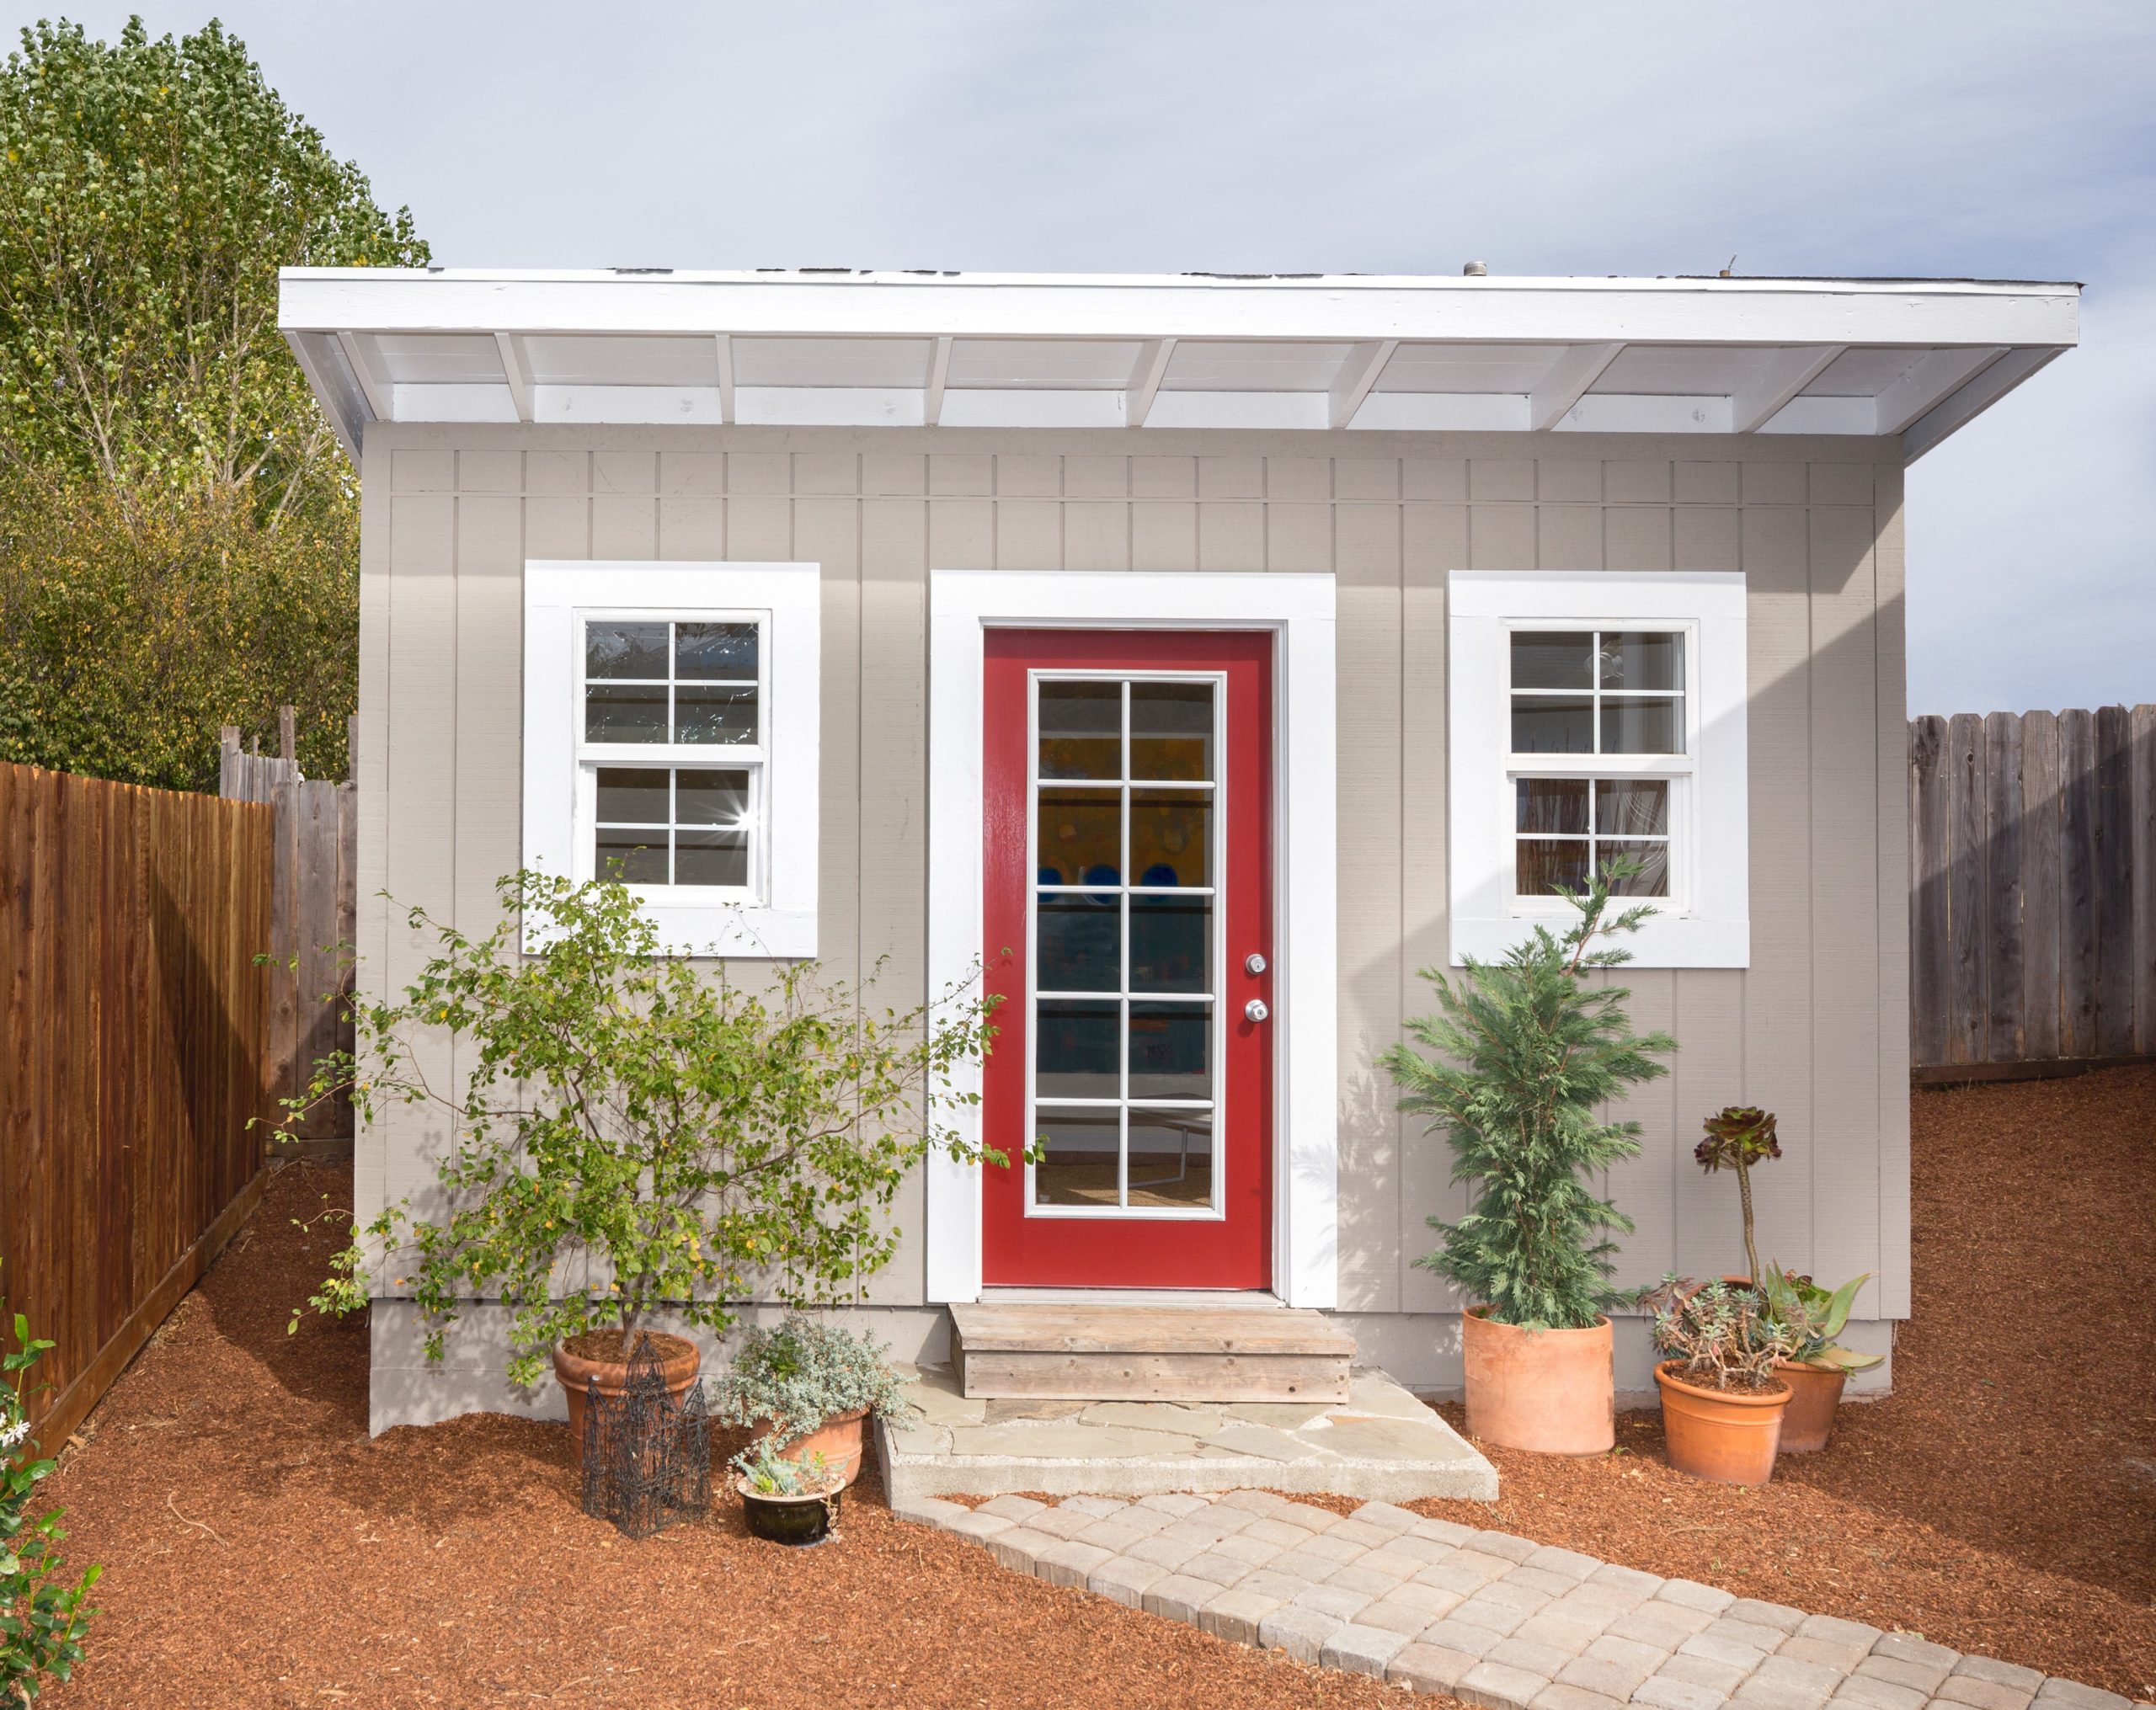 California's New 'Granny Flat' Laws: What you need to know - Part